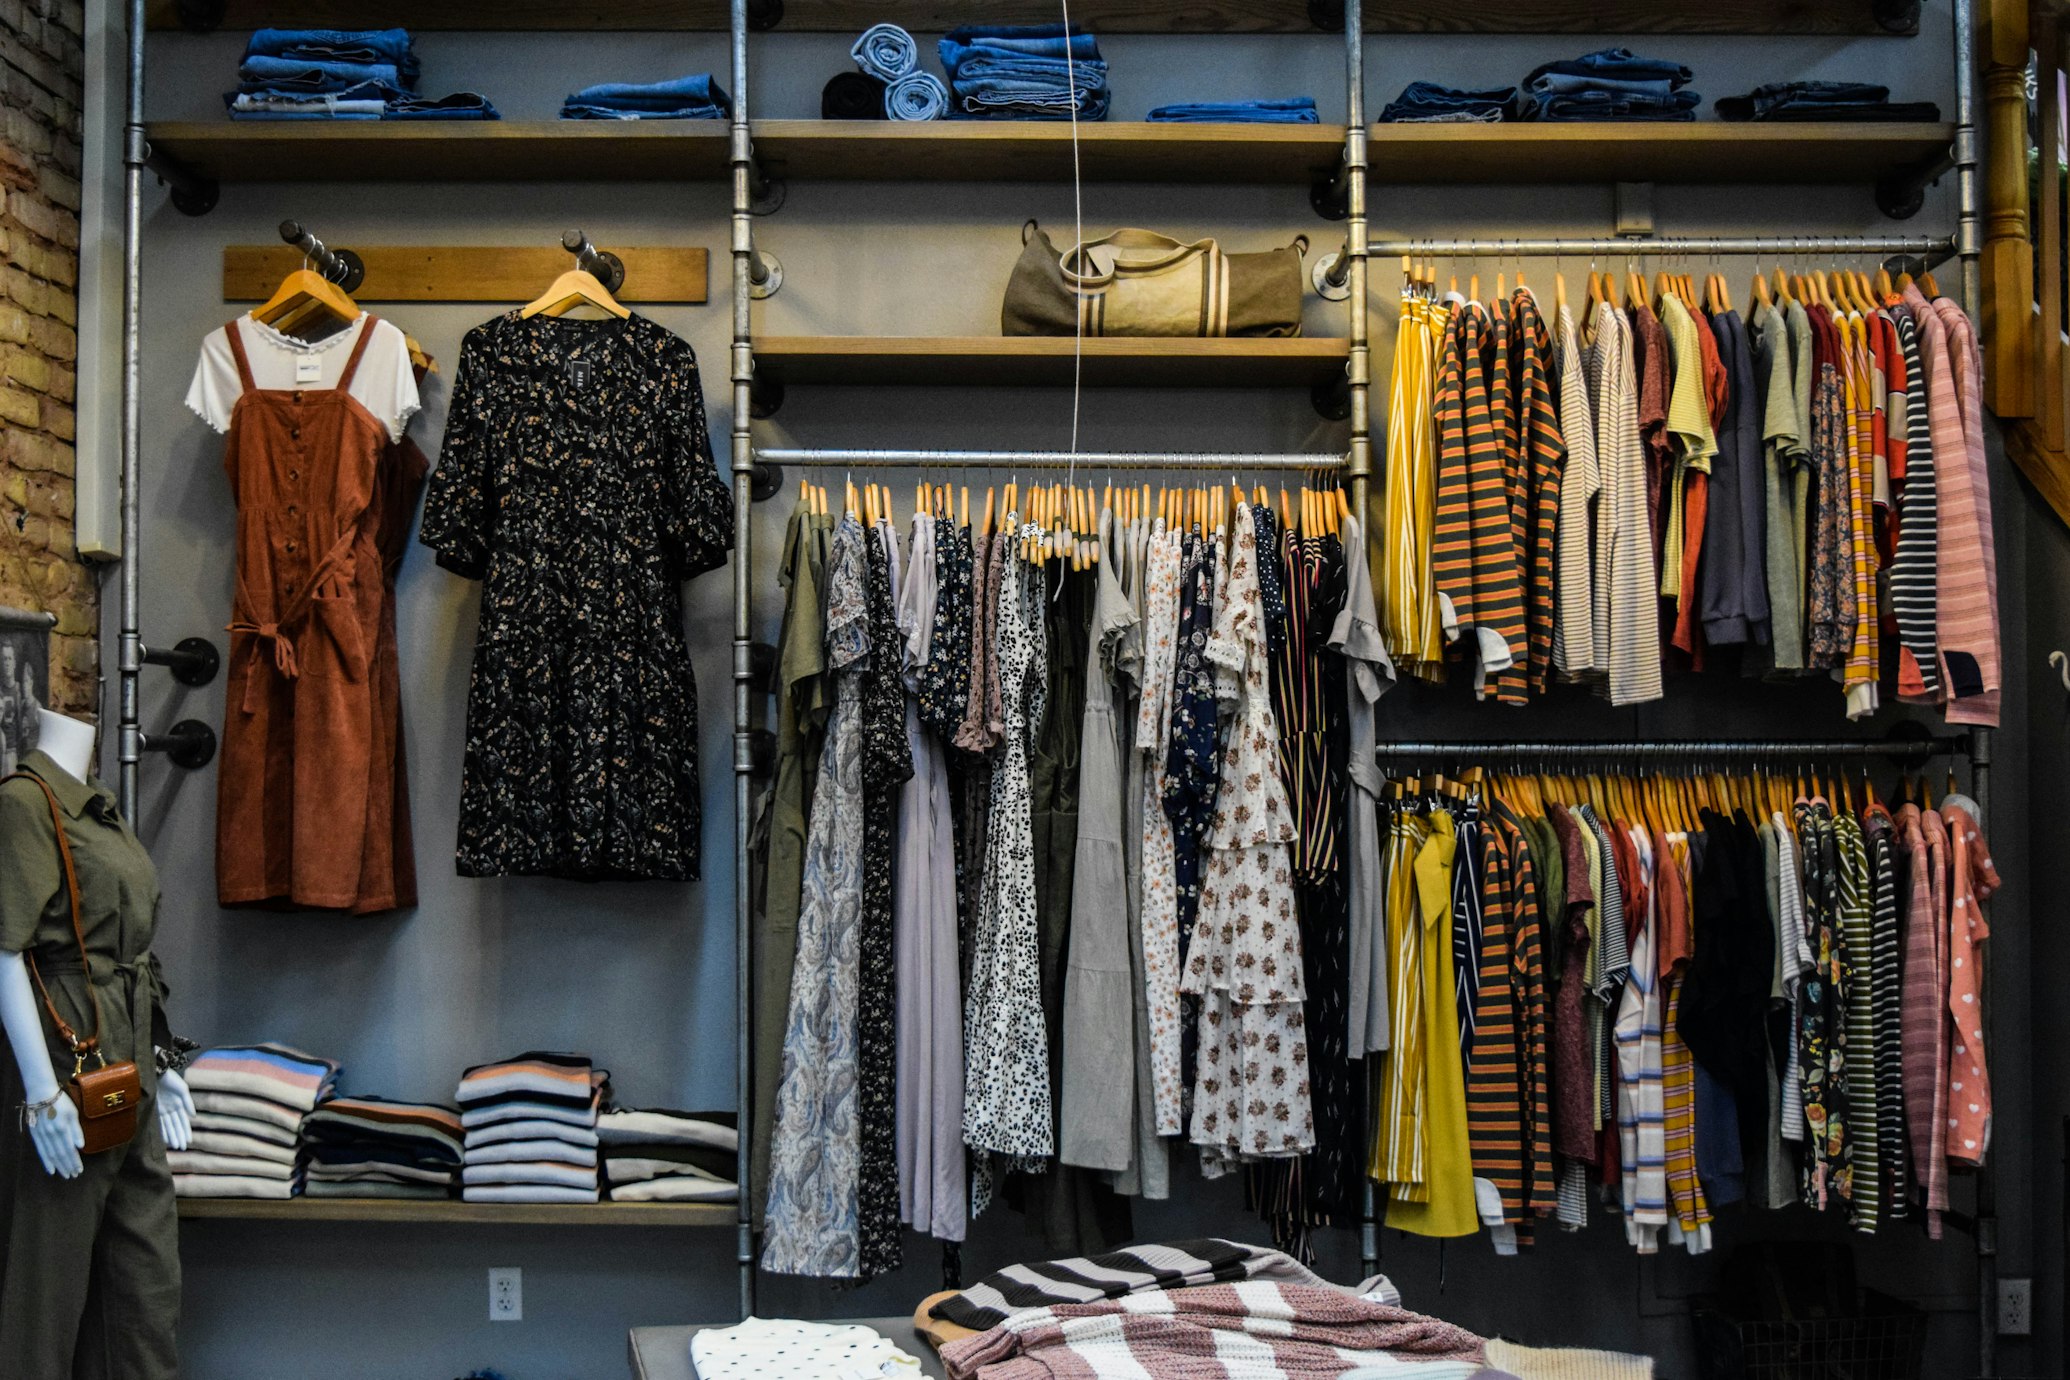 A closet full of dresses limits options for the slow fashion movement